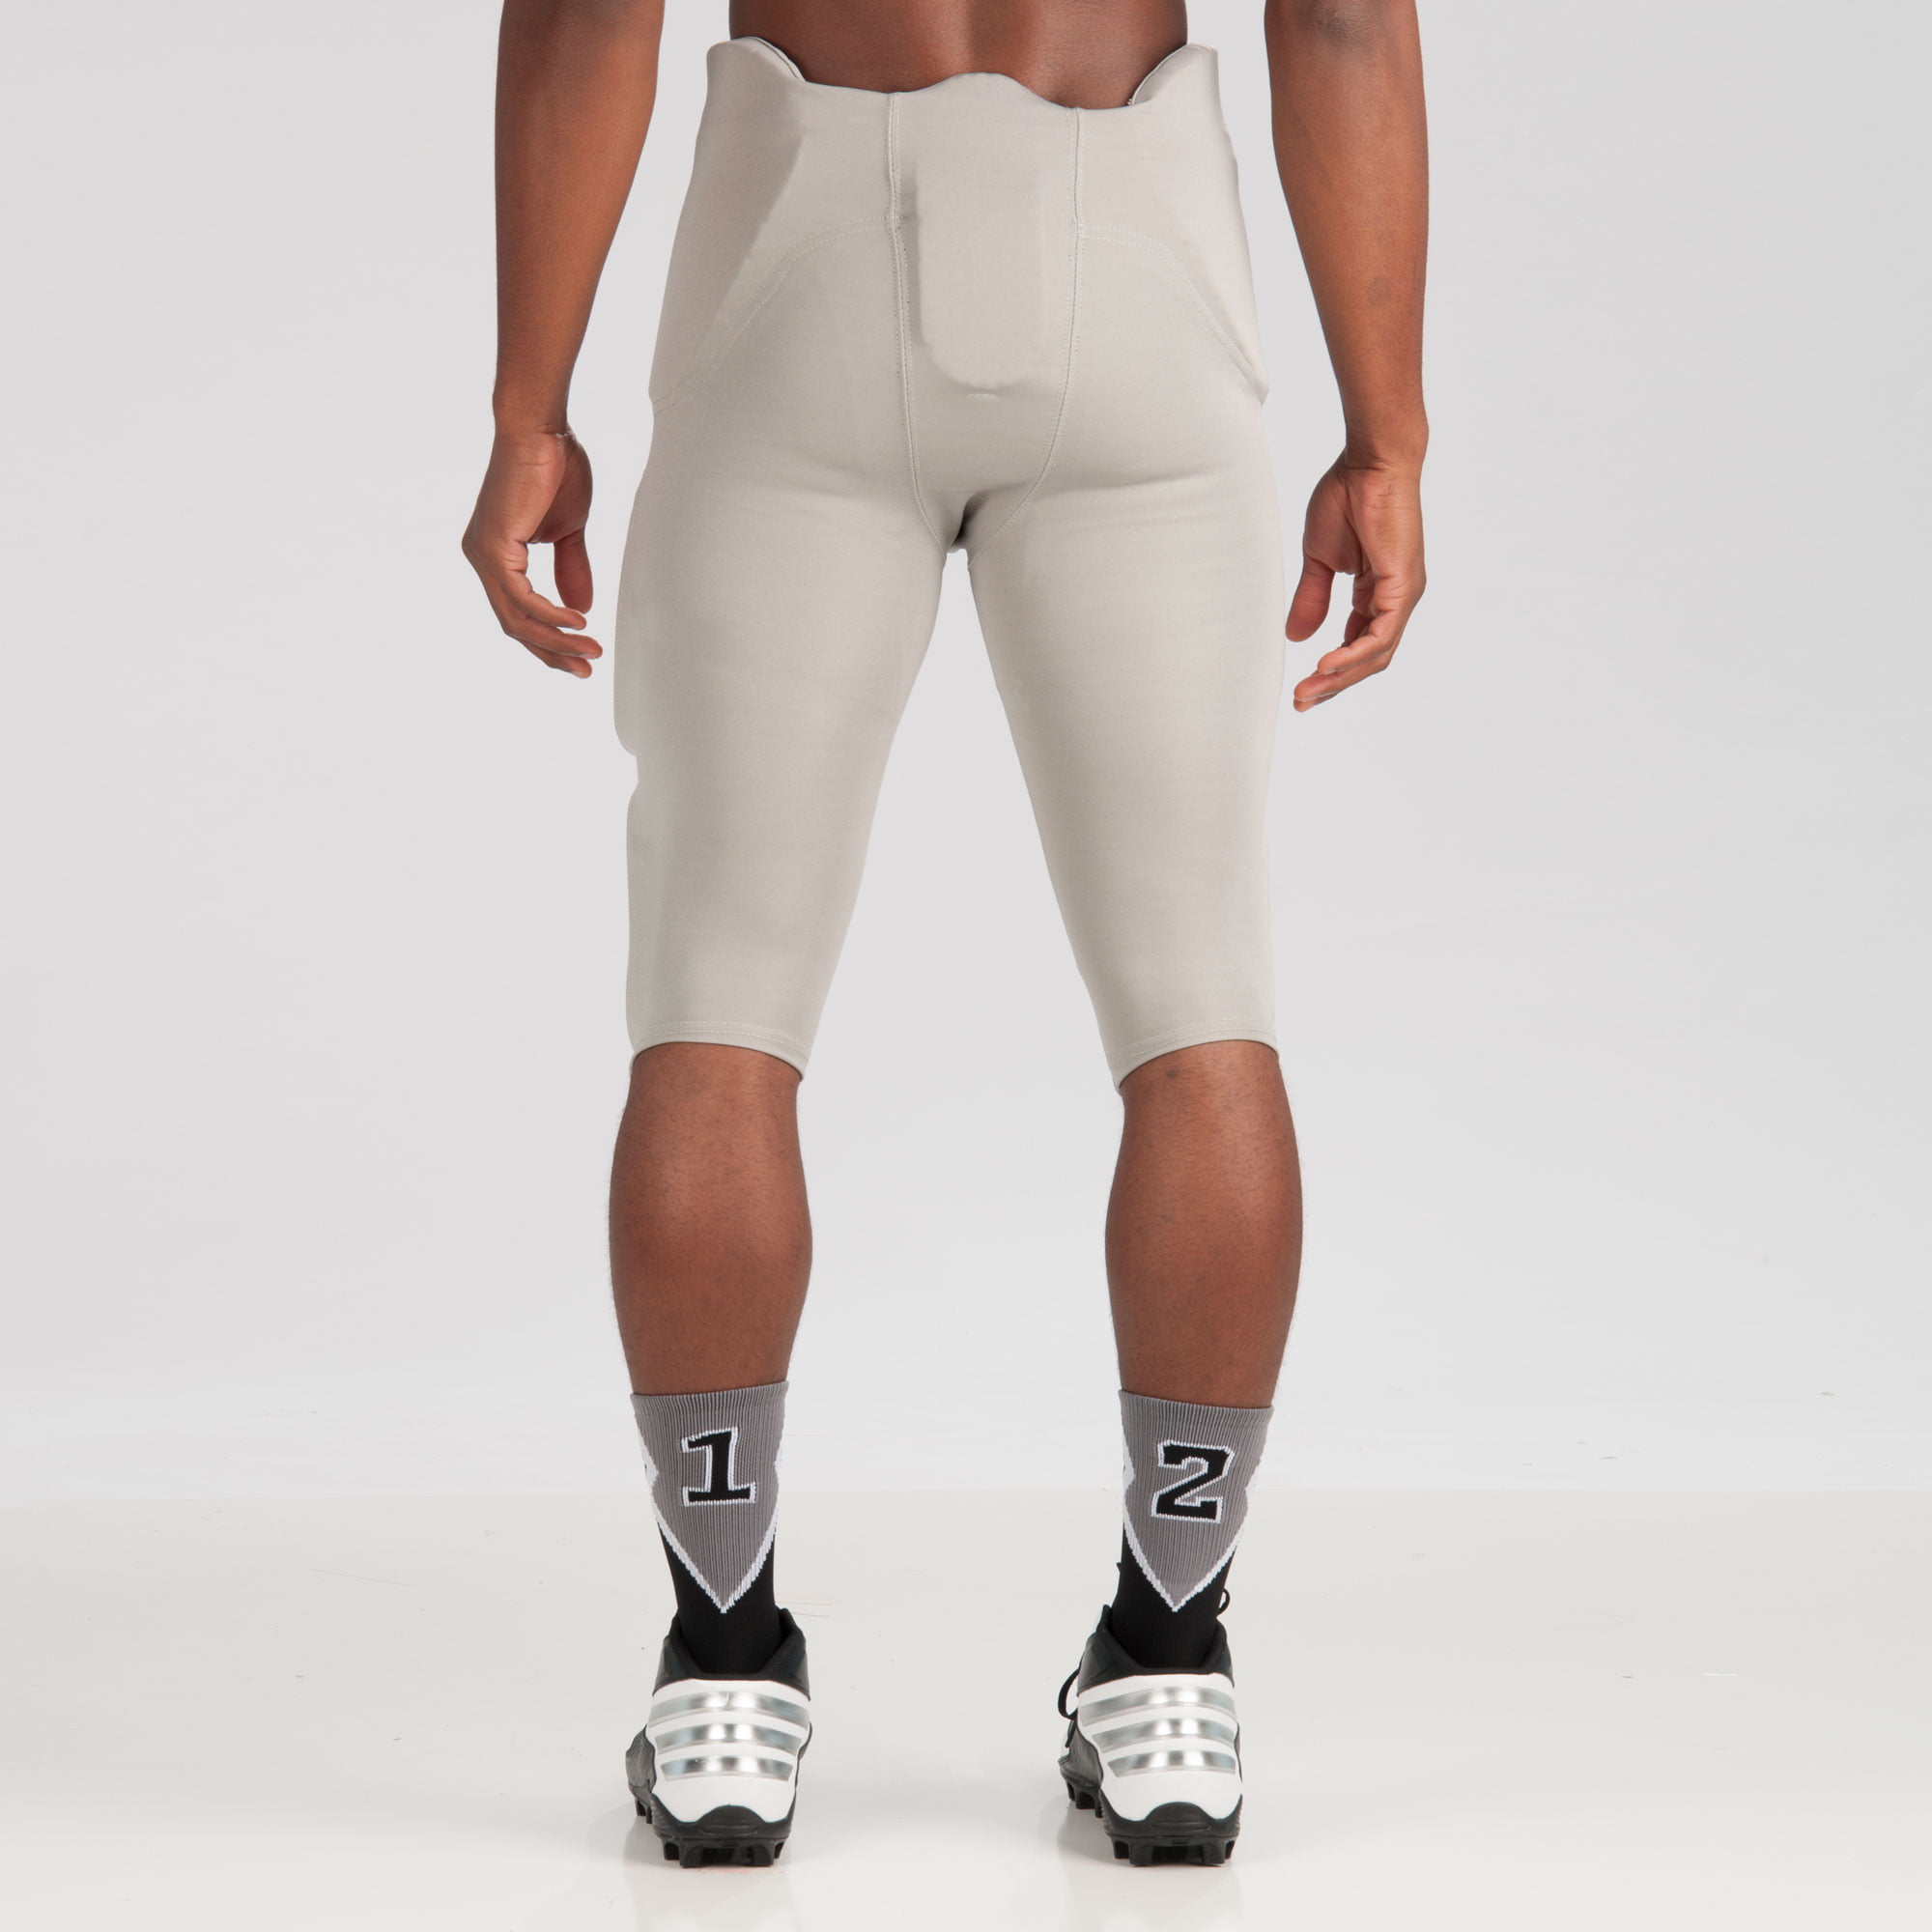 FS-07 Compression pants, 5 integrated pieces, for American football –